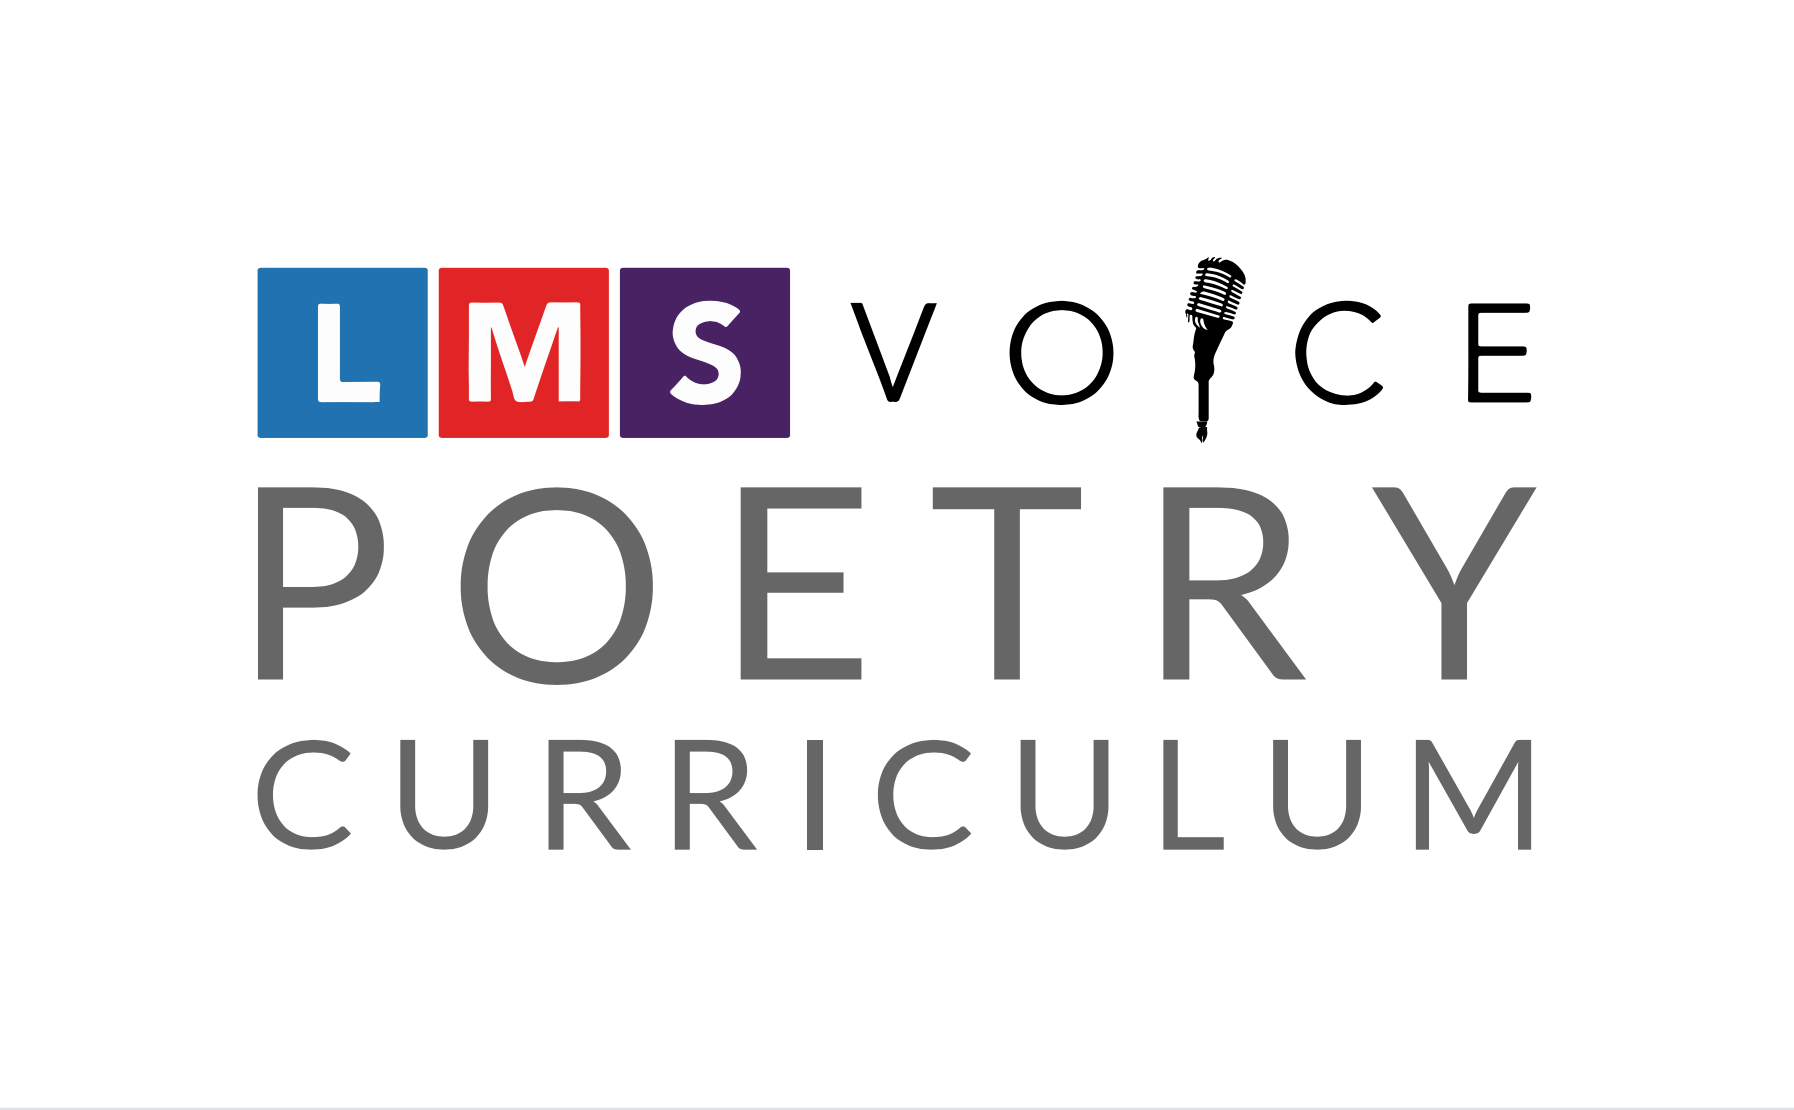 Curriculums - LMS Voice - Engage Your Students Today!